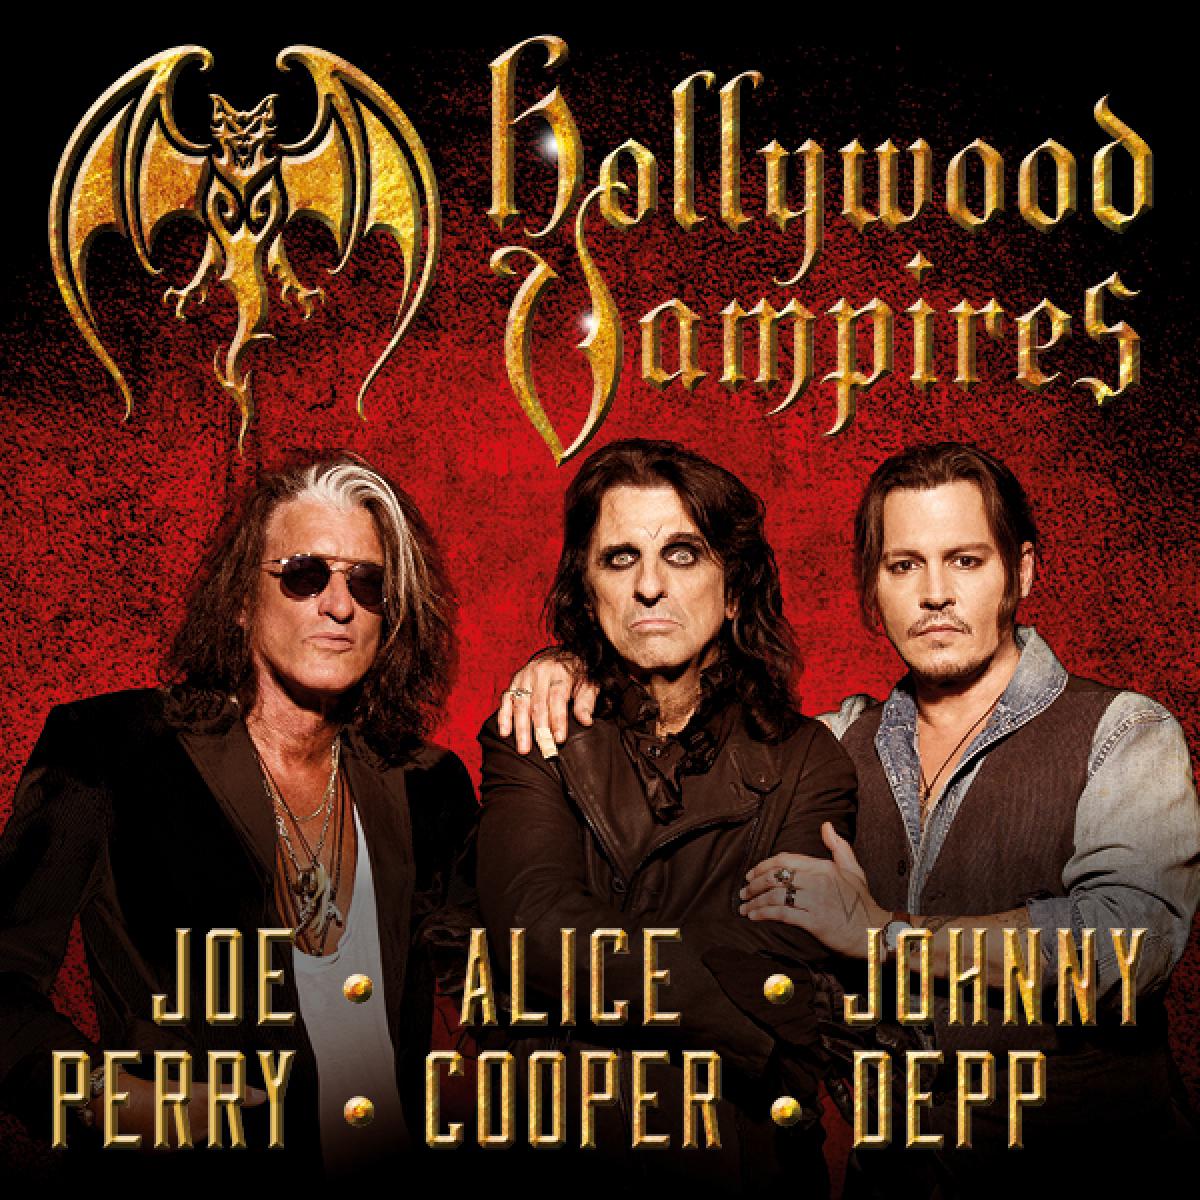 hollywood vampires tour review